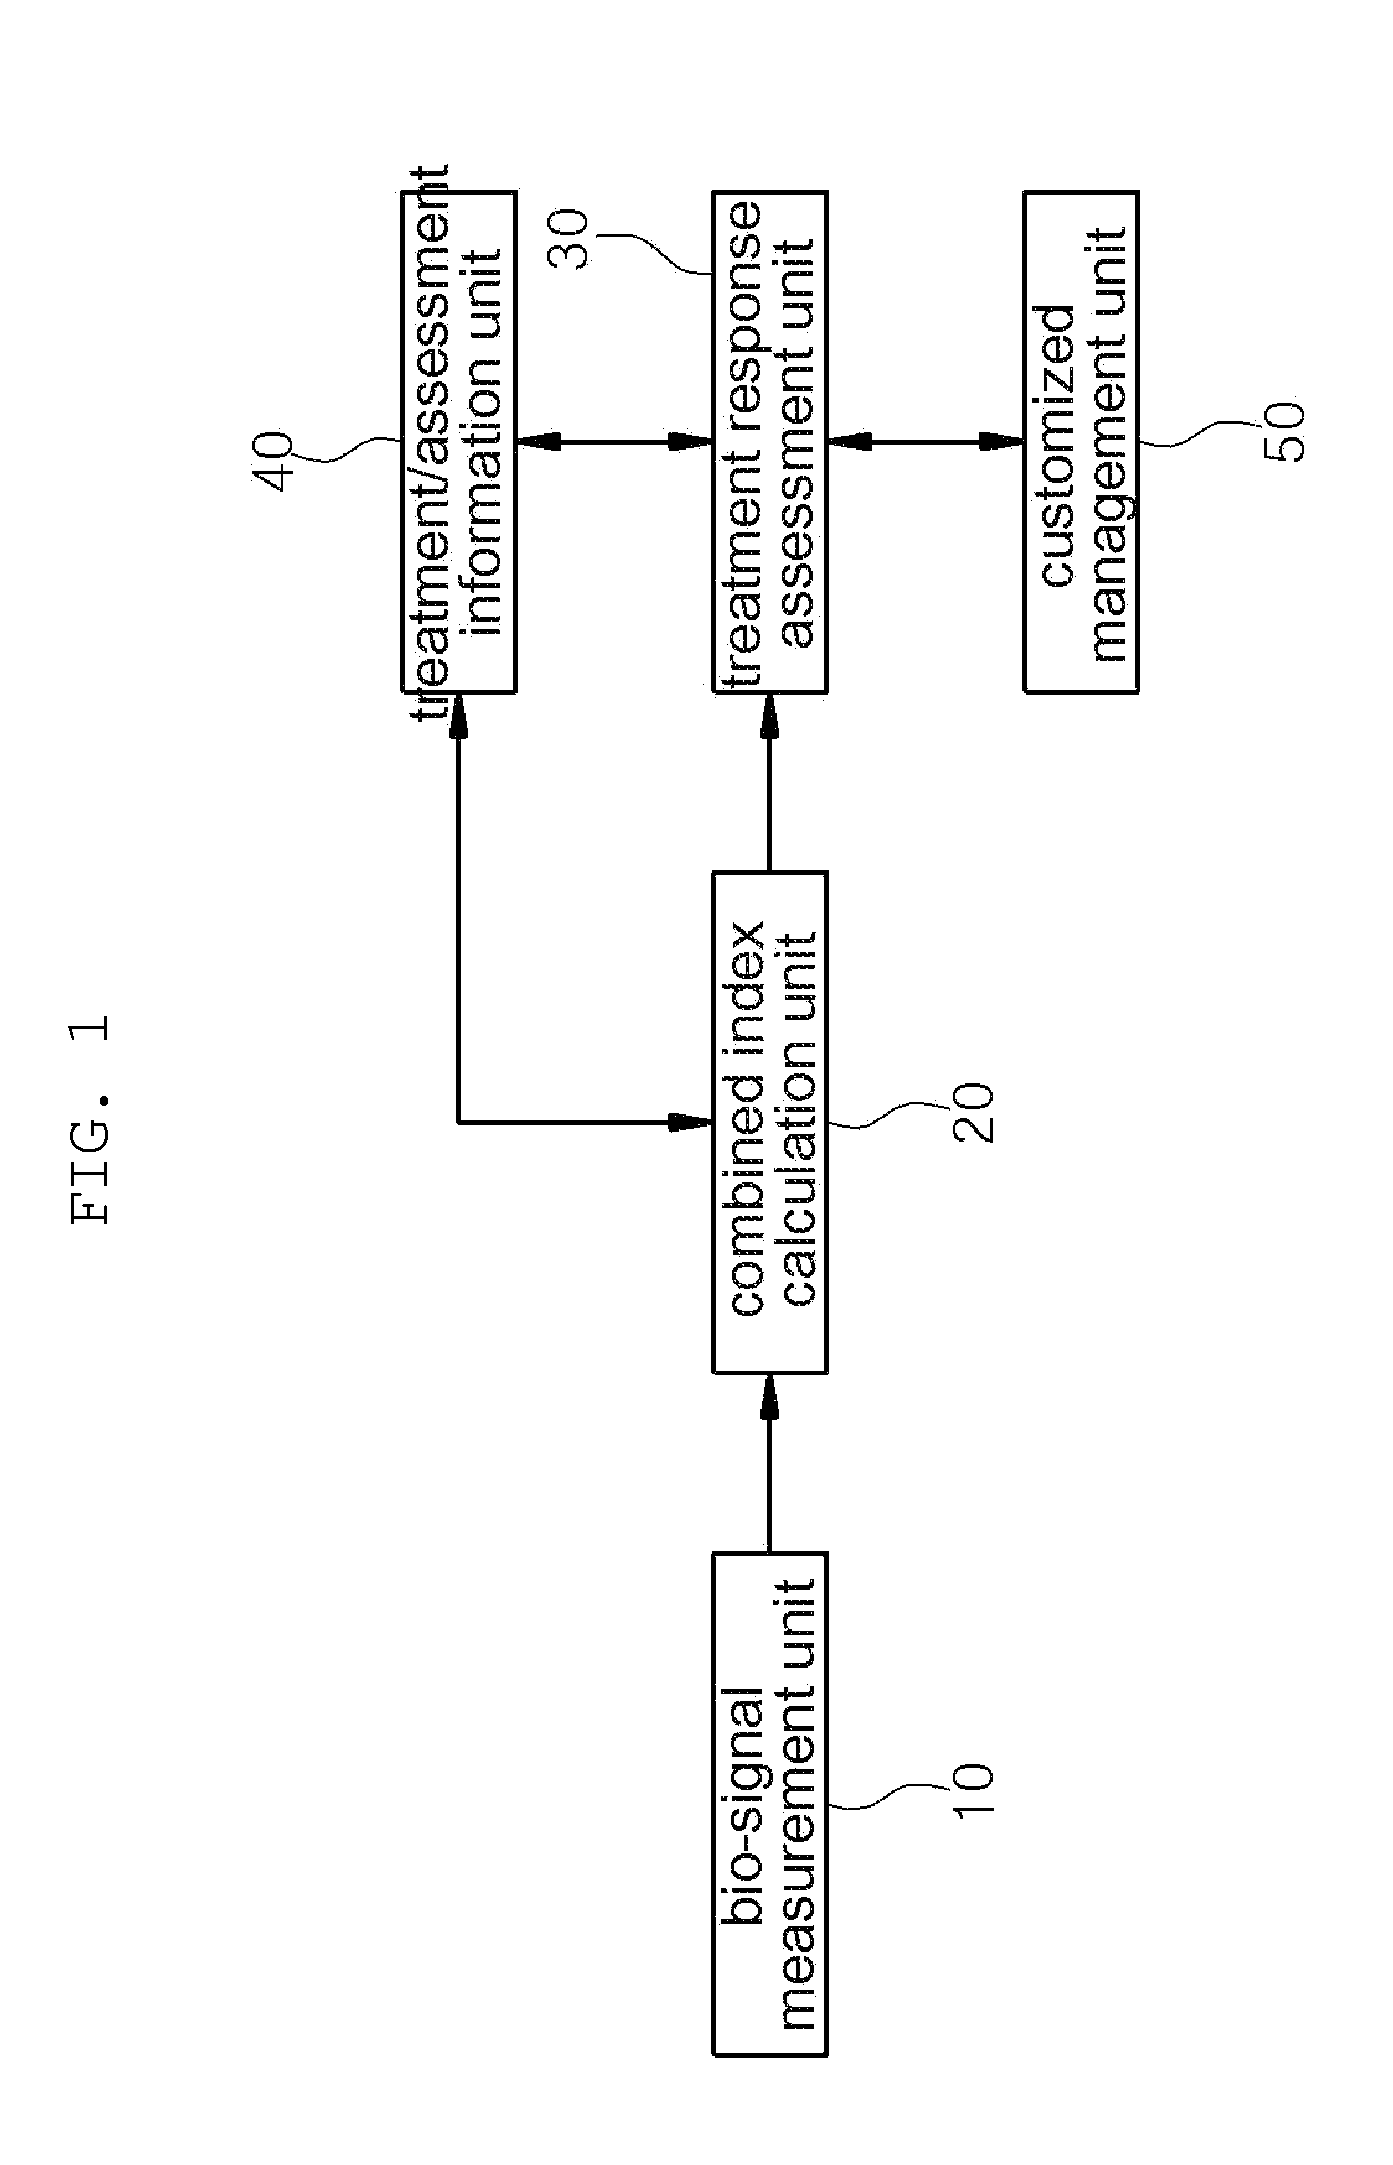 System and method for assessing treatment effects on obstructive sleep apnea